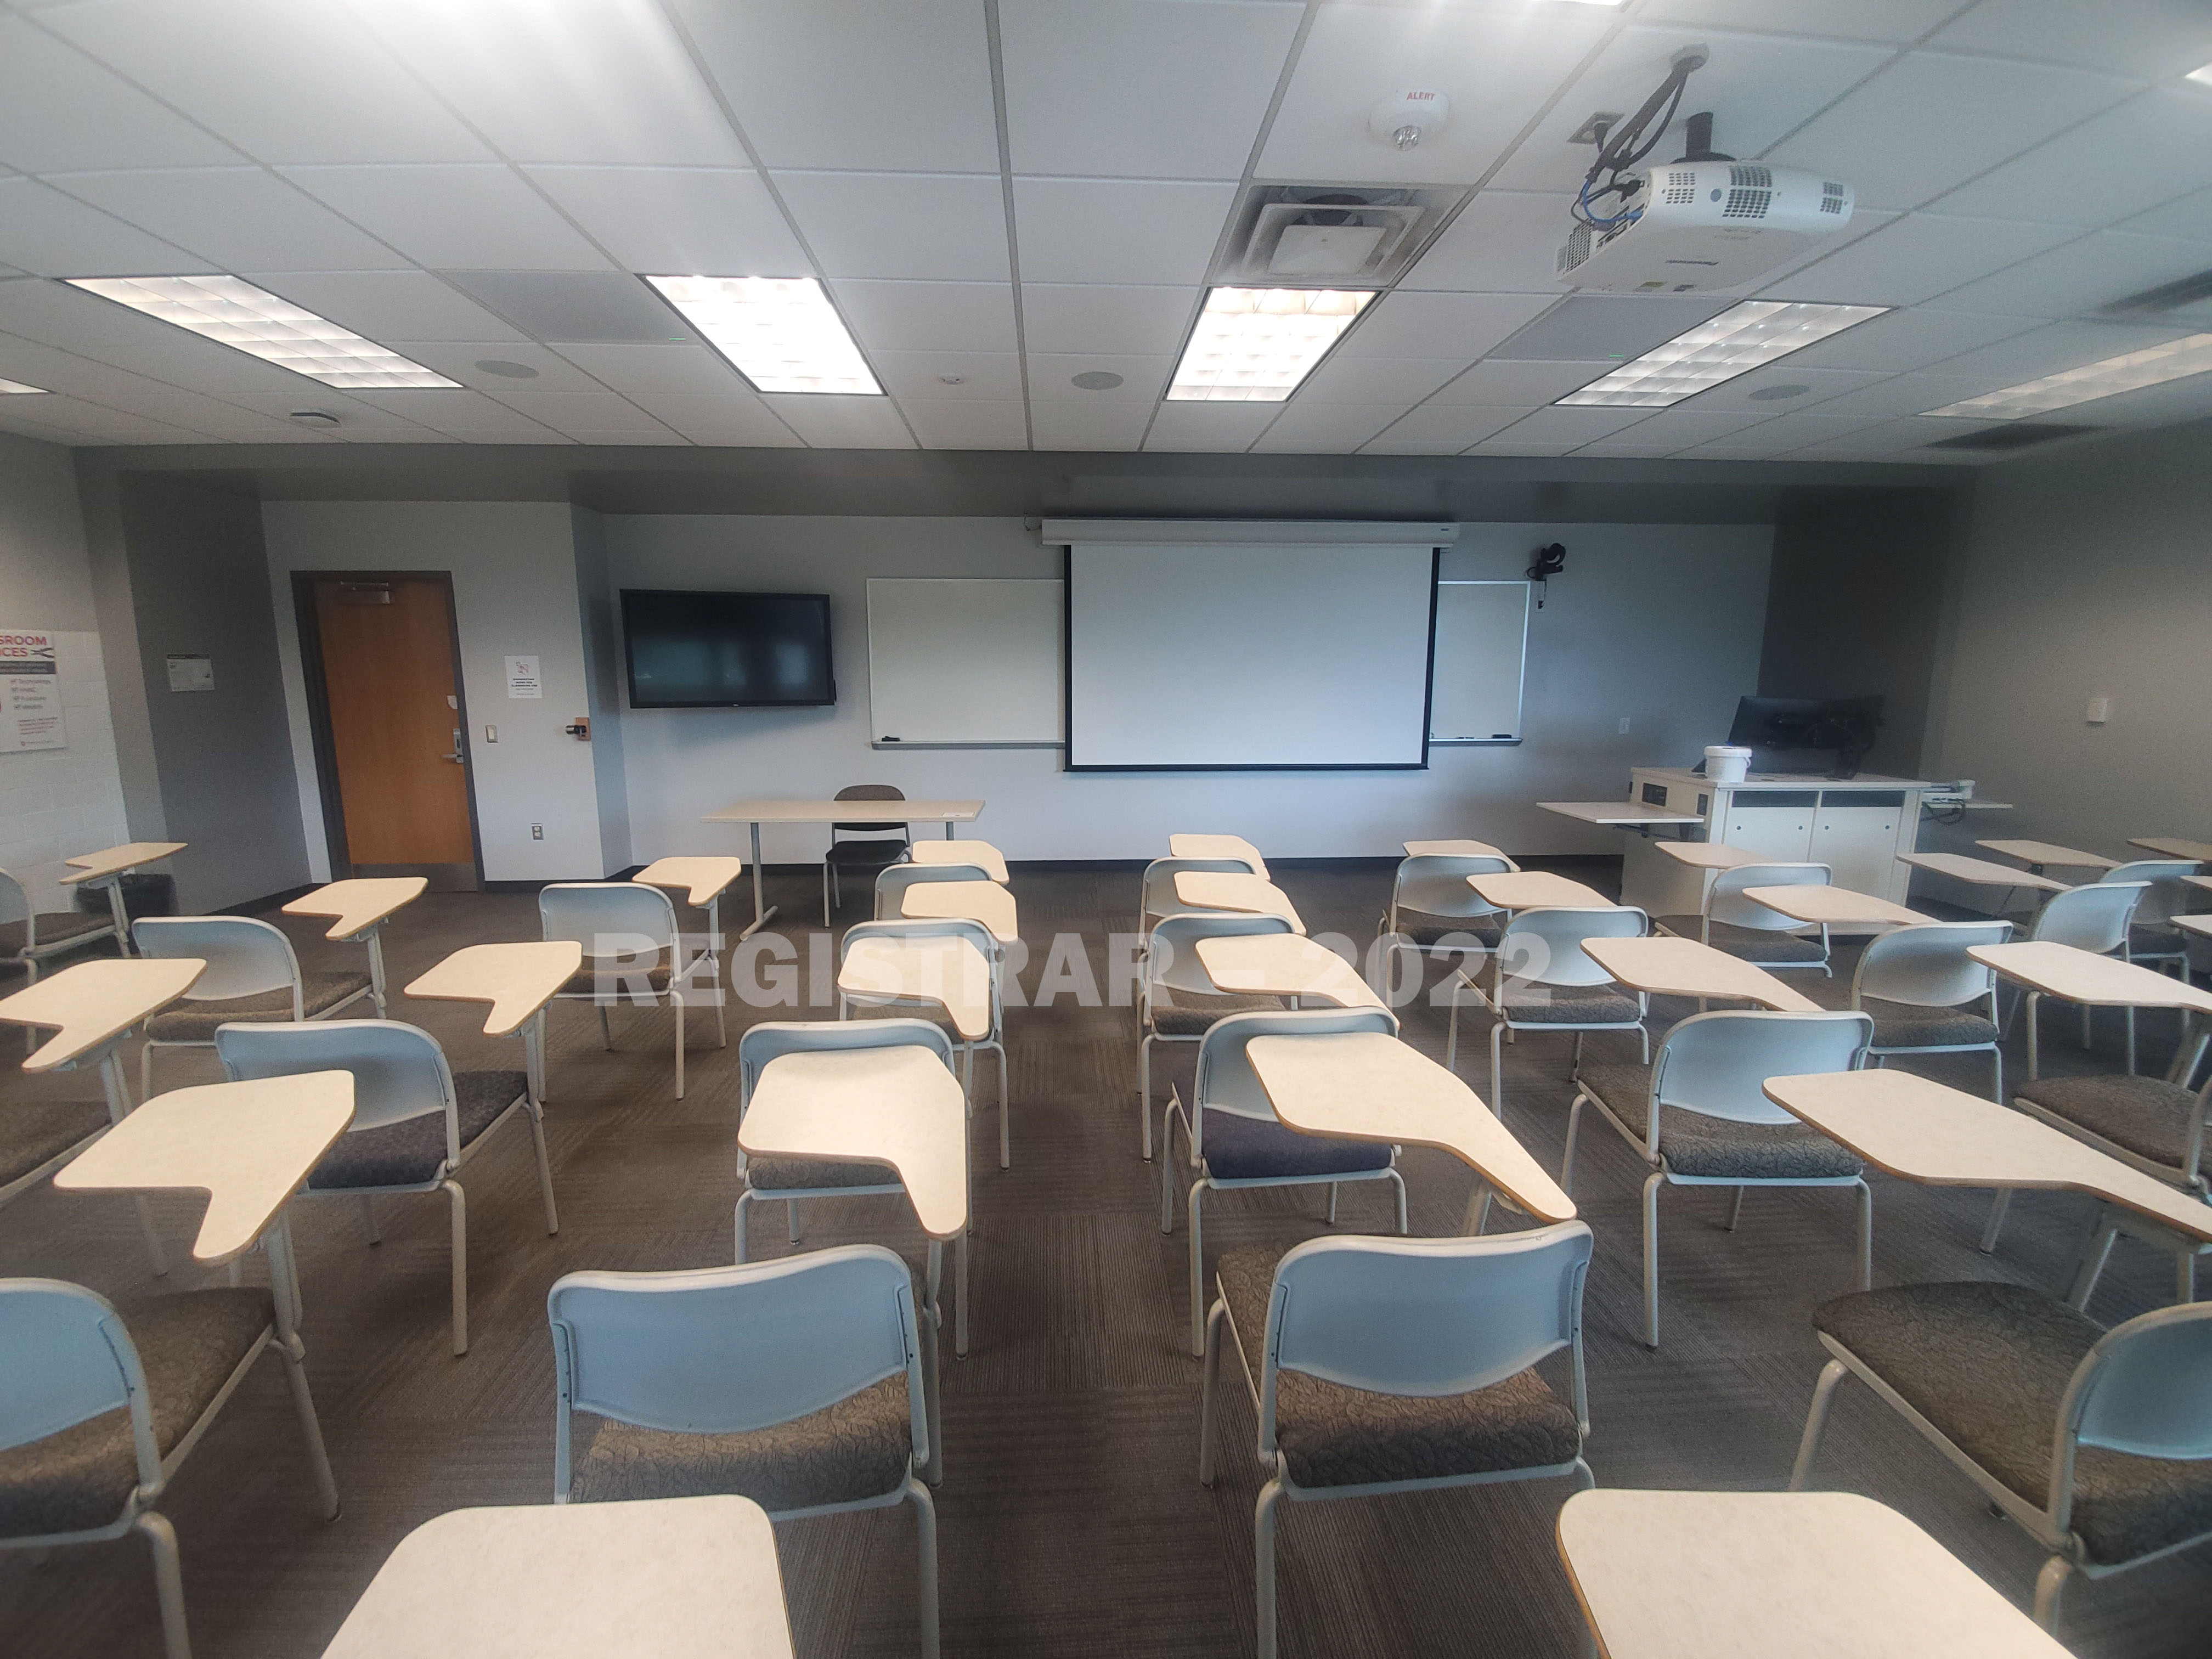 Agricultural Administration room 246 ultra wide angle view from the back of the room with projector screen down